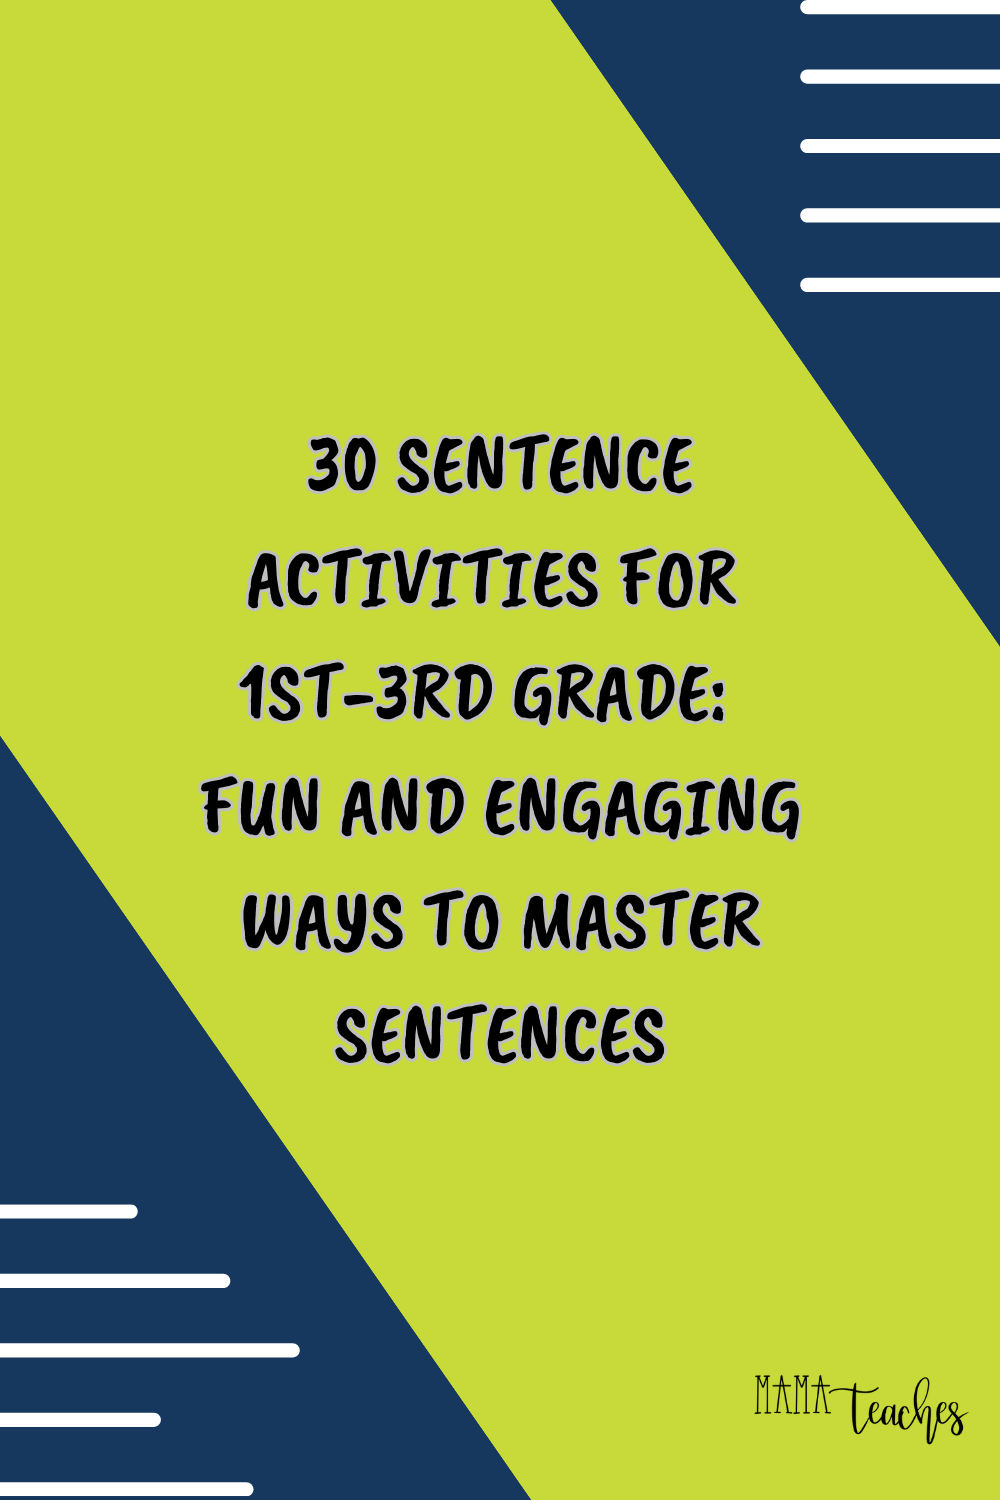 30 Sentence Activities 
for 1st-3rd Grade:  
Fun and Engaging Ways to Master Sentences